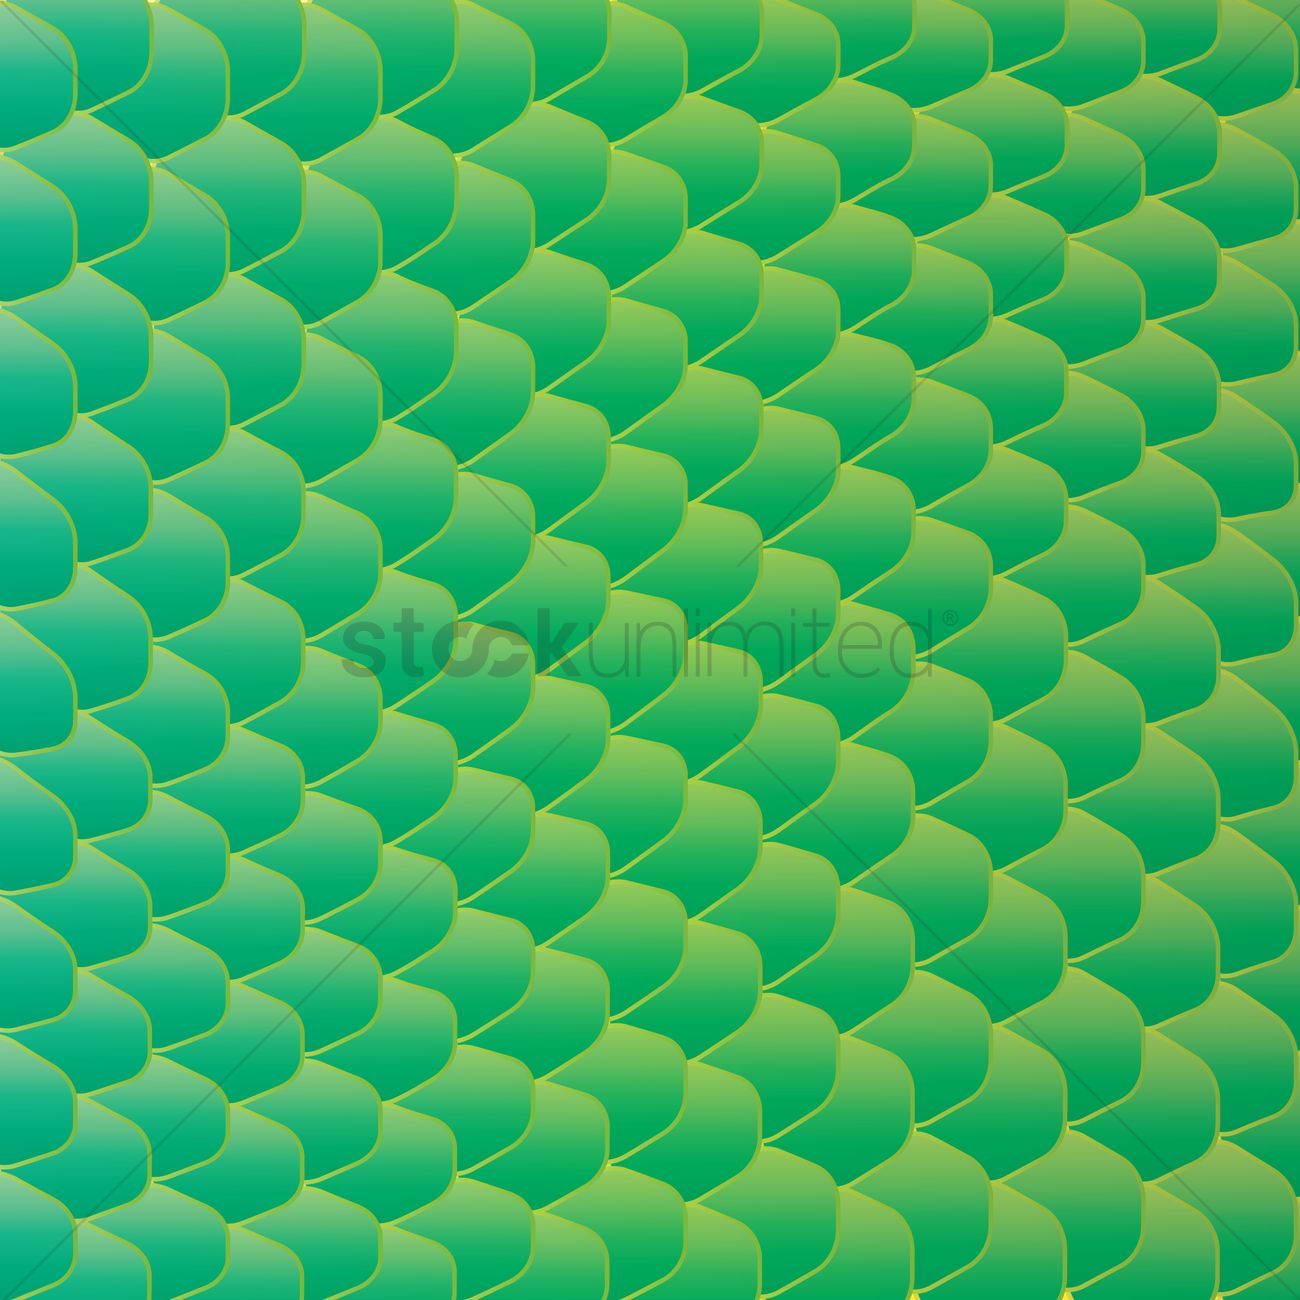 Fish Scale Background Vector Image Stockunlimited